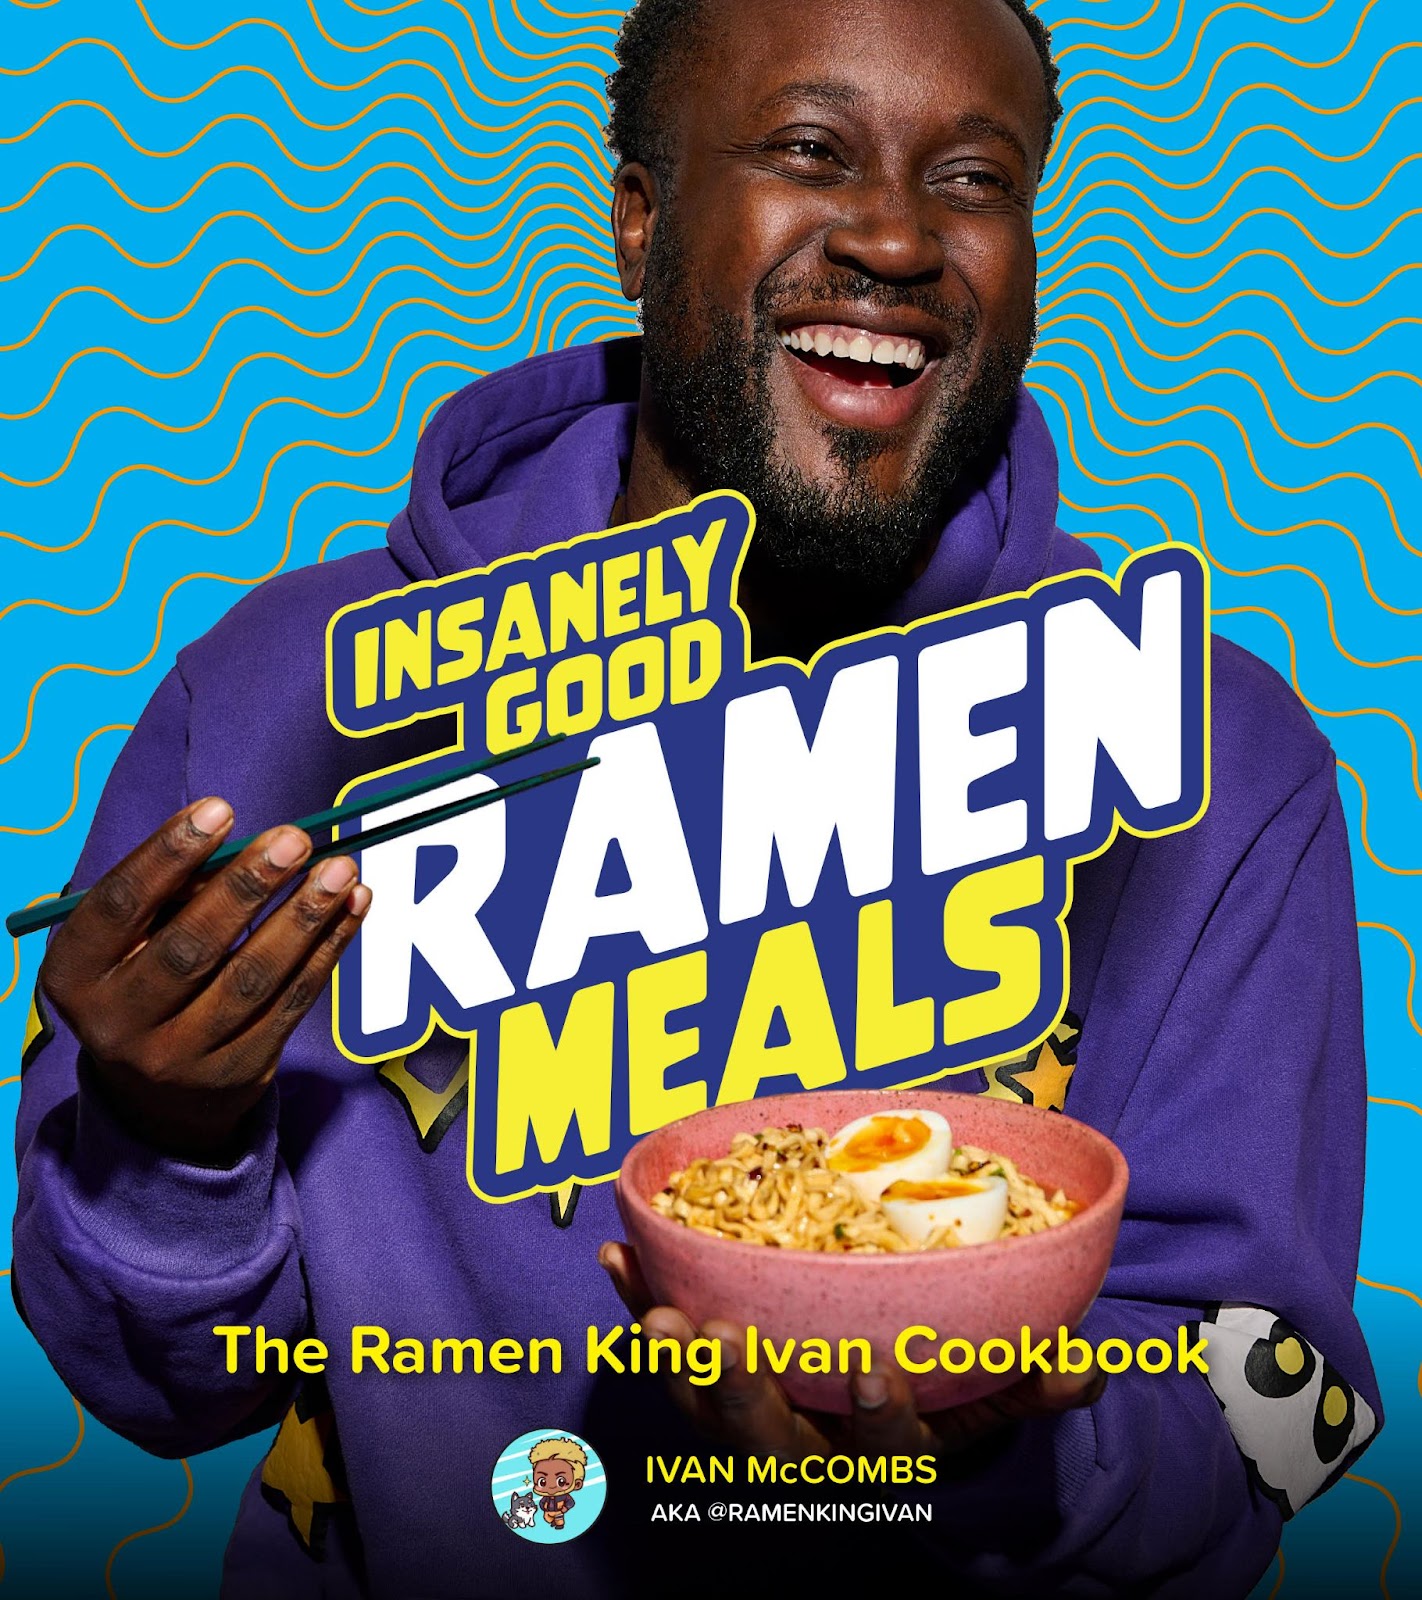 From Ramen Noodles To Social Media Fame: The Story Of Ivan McCombs And His Rise As RamenKingIvan